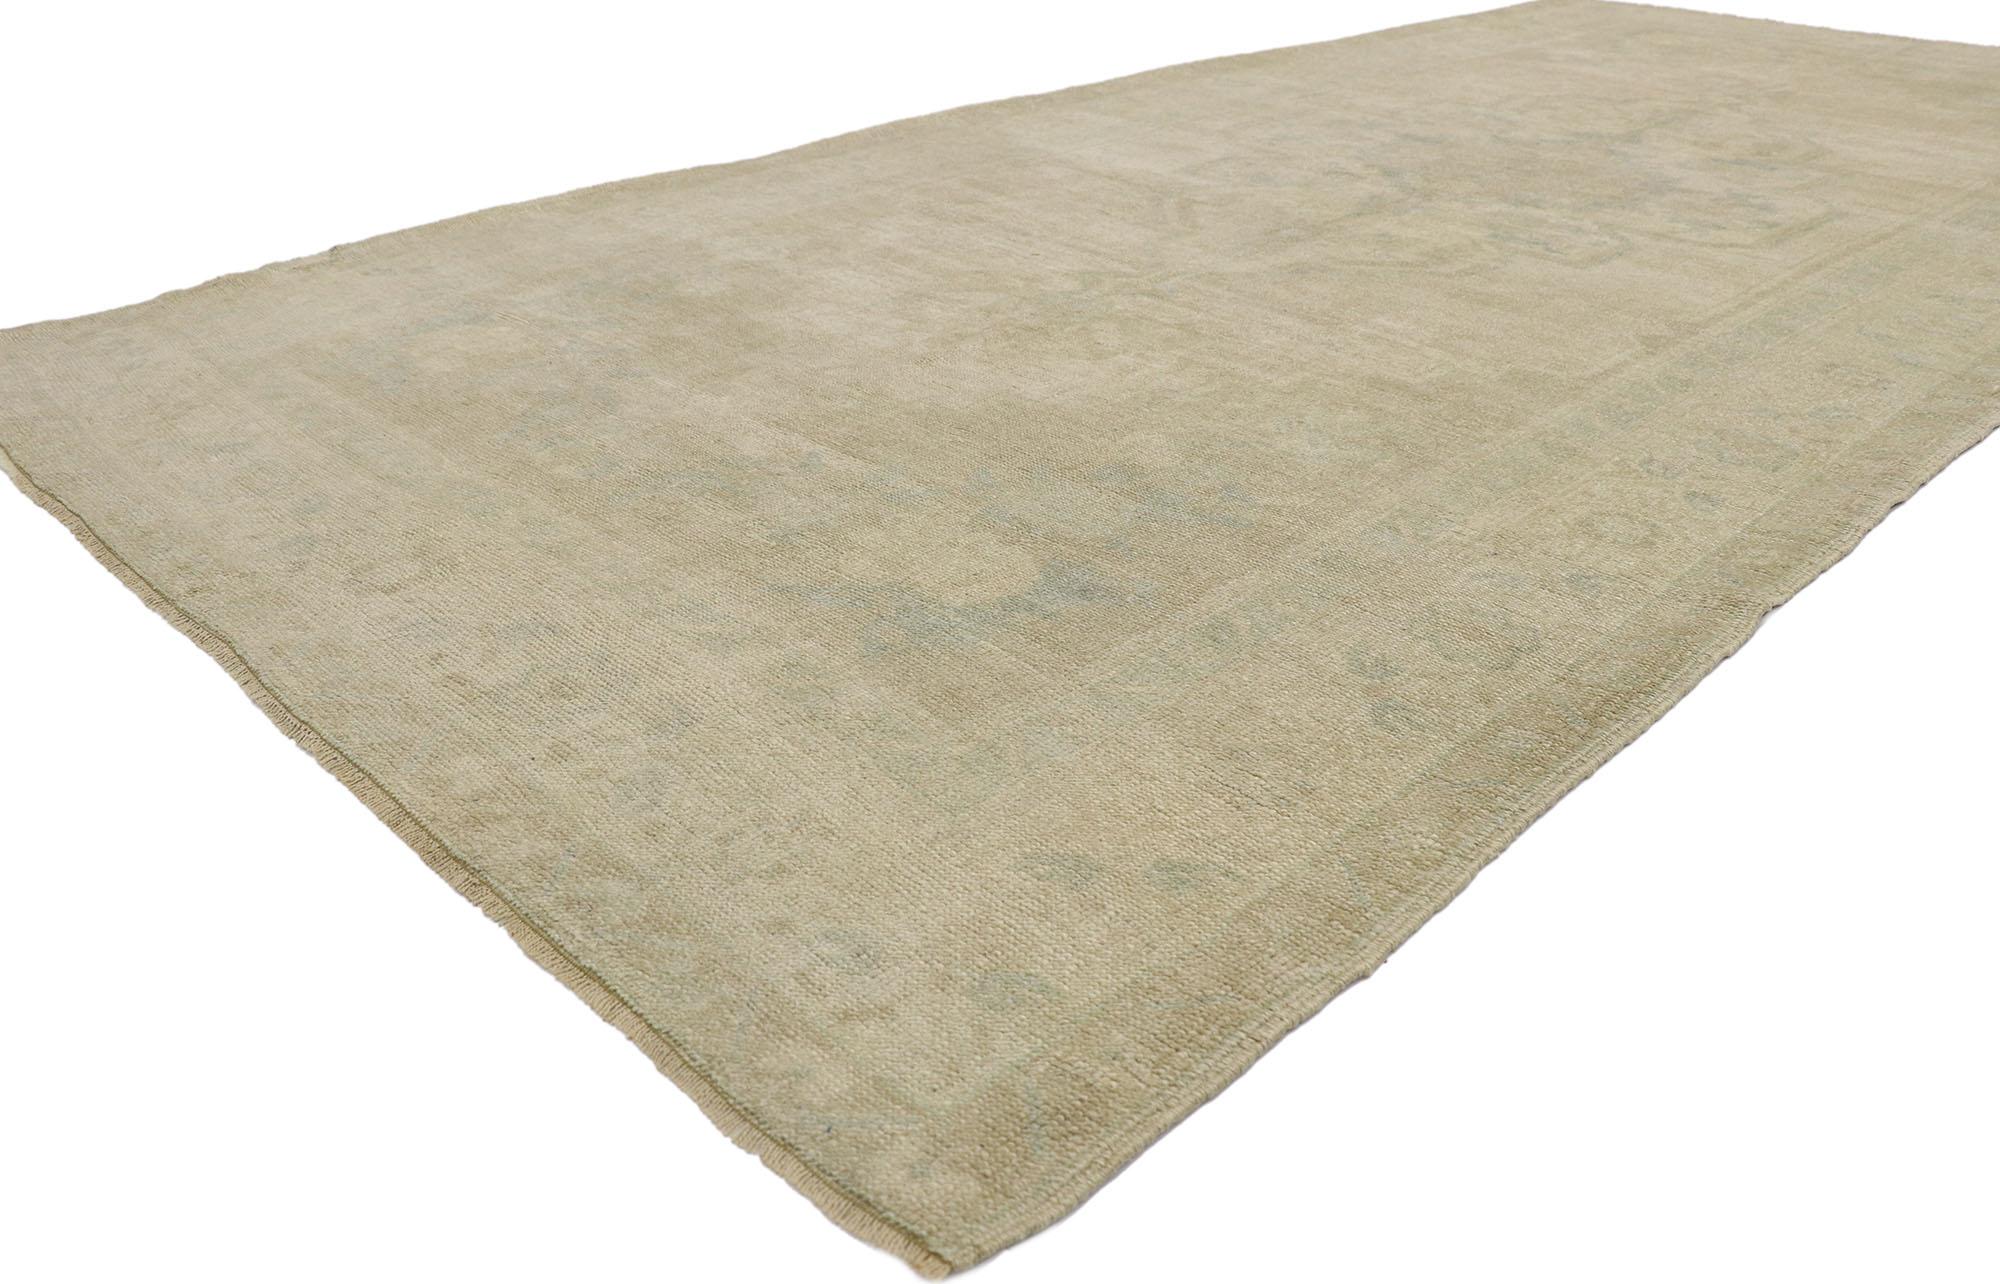 53620 Vintage Turkish Oushak gallery rug with Modern Farmhouse style 05'06 x 11'09. Emanating timeless appeal, effortless beauty and neutral hues, this hand knotted wool vintage Turkish Oushak gallery rug is poised to impress. The antique washed